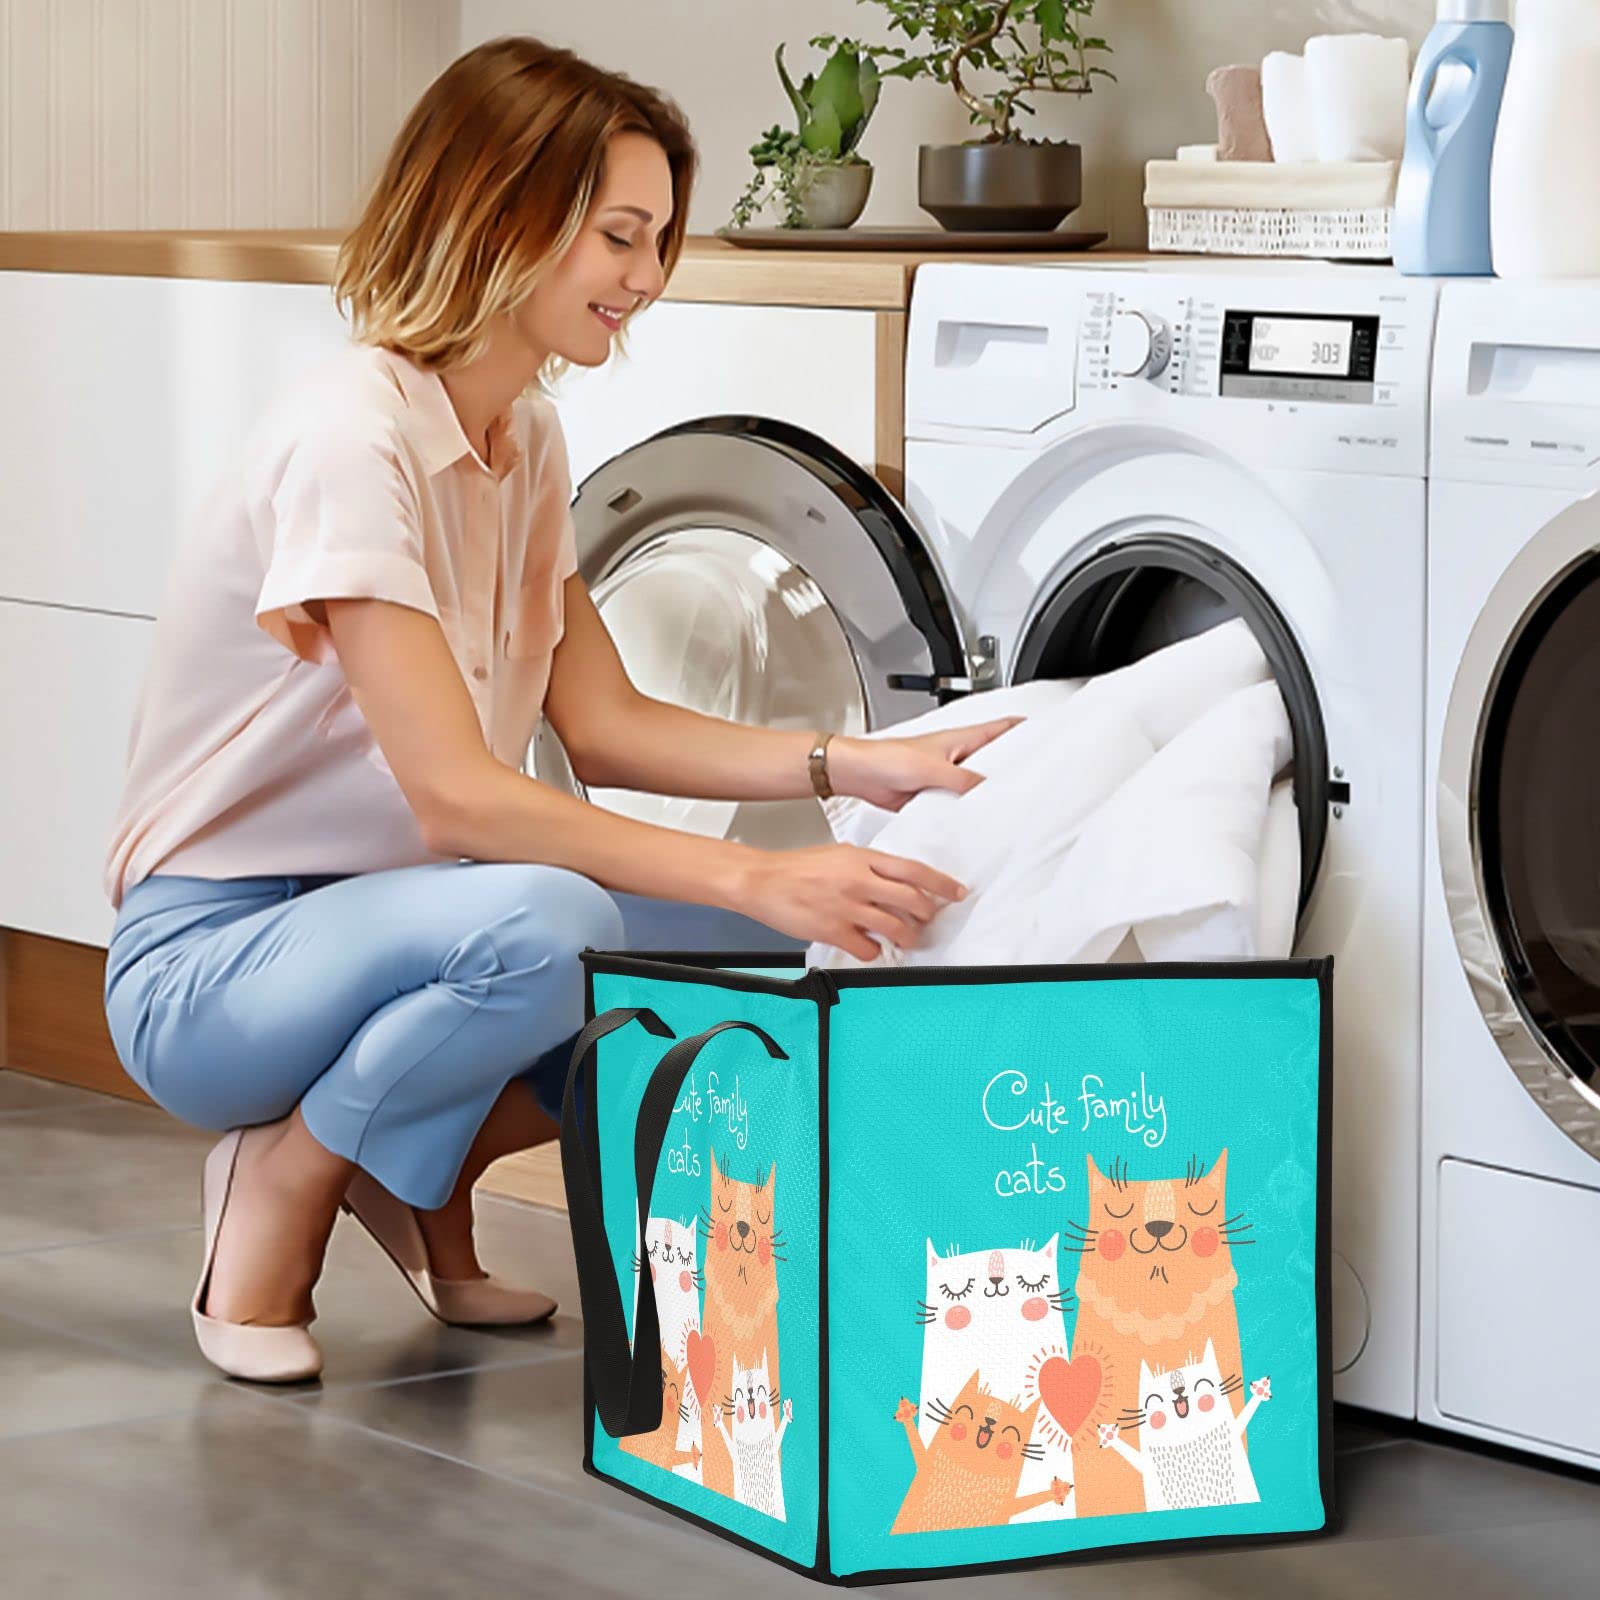 Poeticcity Cute Cats Family Parents and Children in Orange White on Turquoise Square Storage Basket Bin, Collapsible Storage Box, Baskets Organizer for Toy, Clothes Easy to Assemble 10.6x10.6x10.6 in